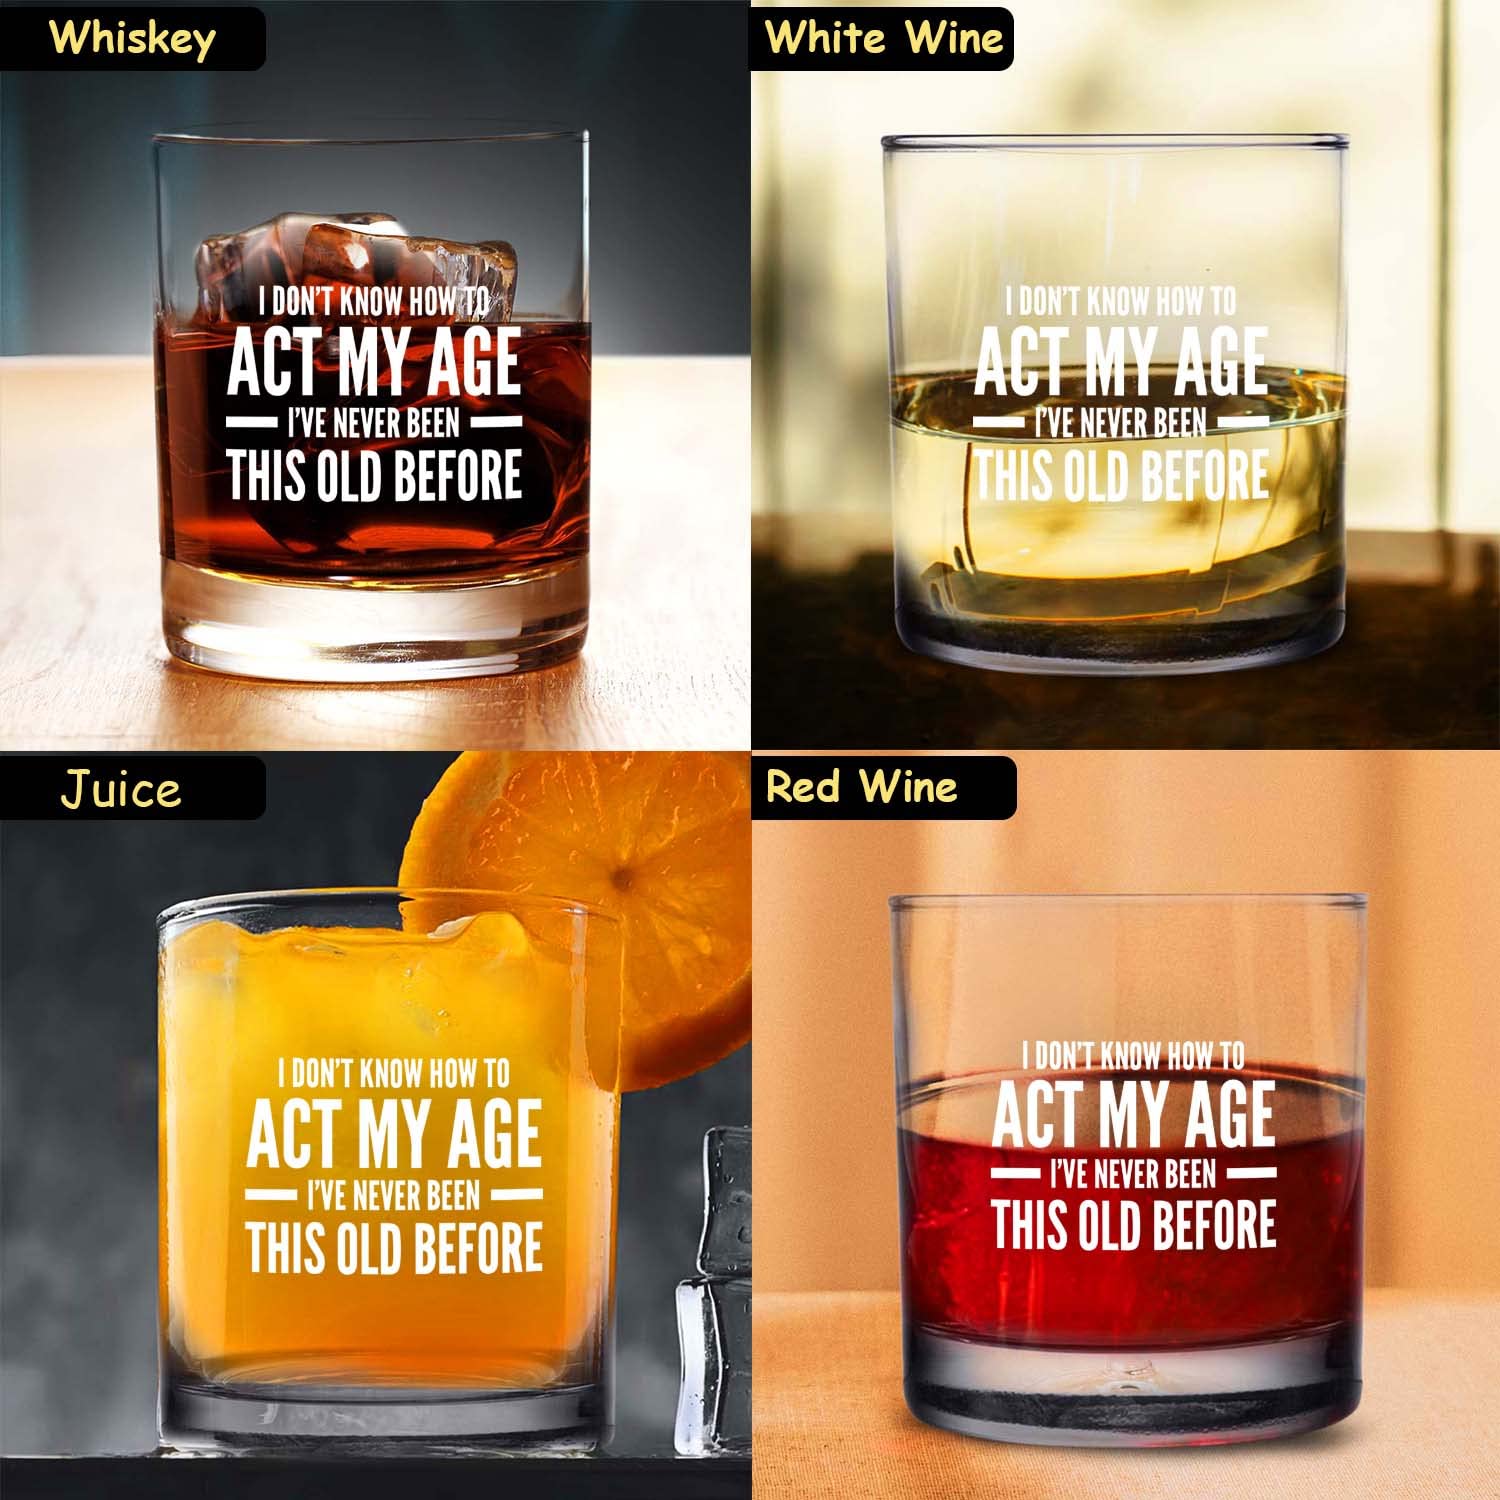 I Don't Know How To Act My Age Rocks Glass-11oz- Whiskey Scotch Glass Funny Birthday or Retirement Gift- Old Fashioned Whiskey Glasses- Lowball Rocks Glass- Gag Gift for Dad, Grandpa, Made in USA